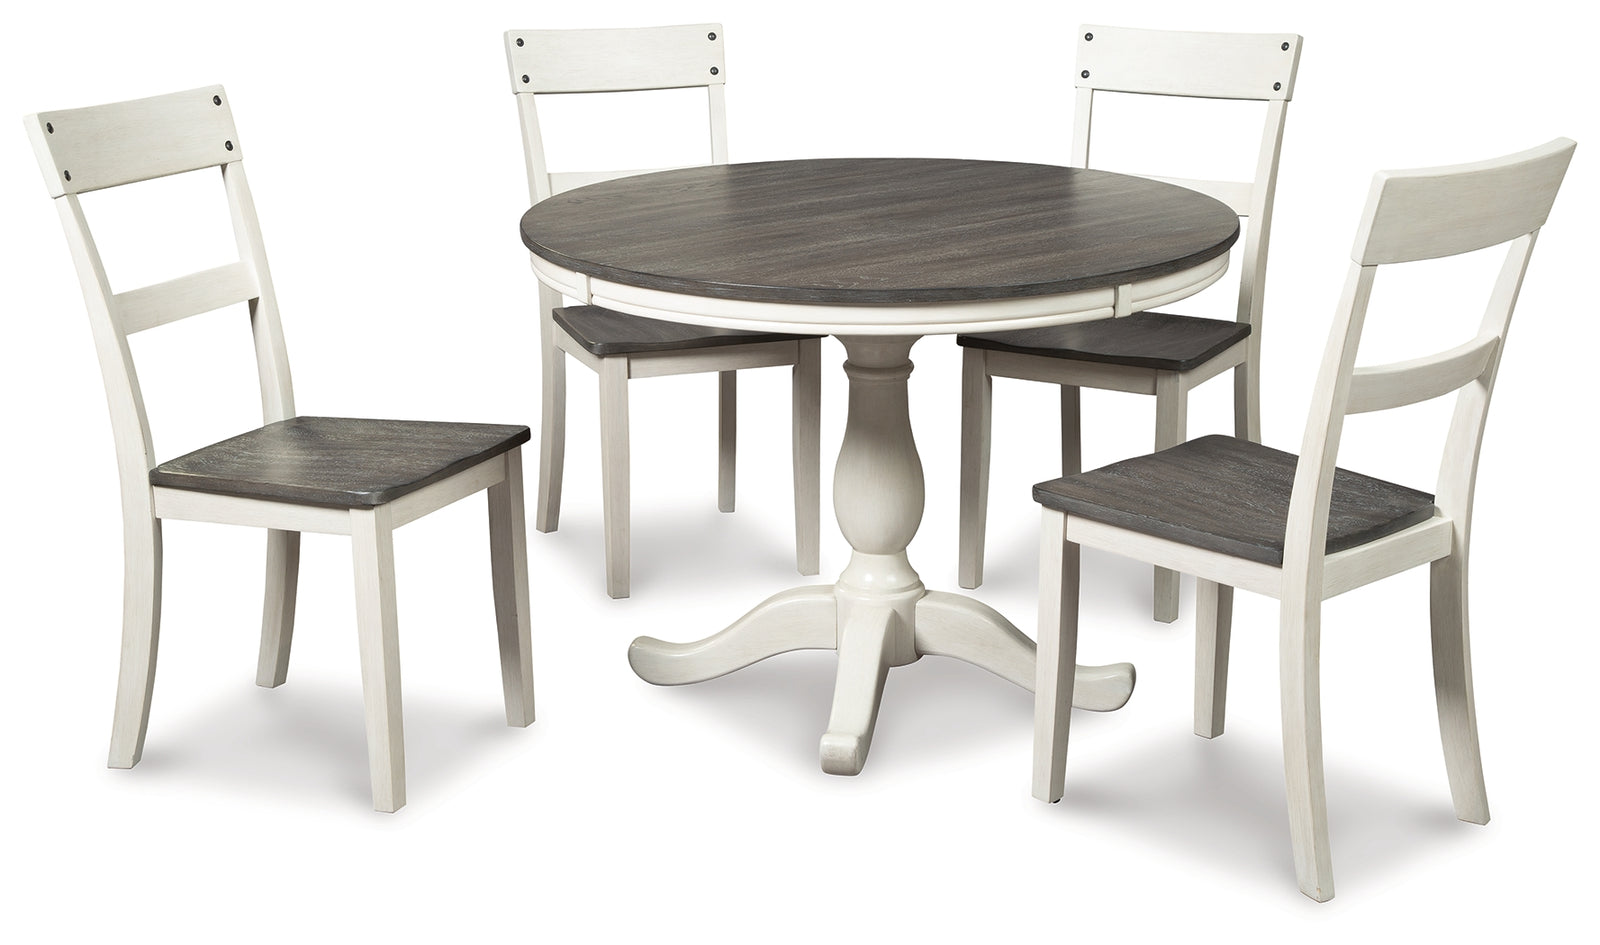 Nelling Two-tone Circle Dining Room Set